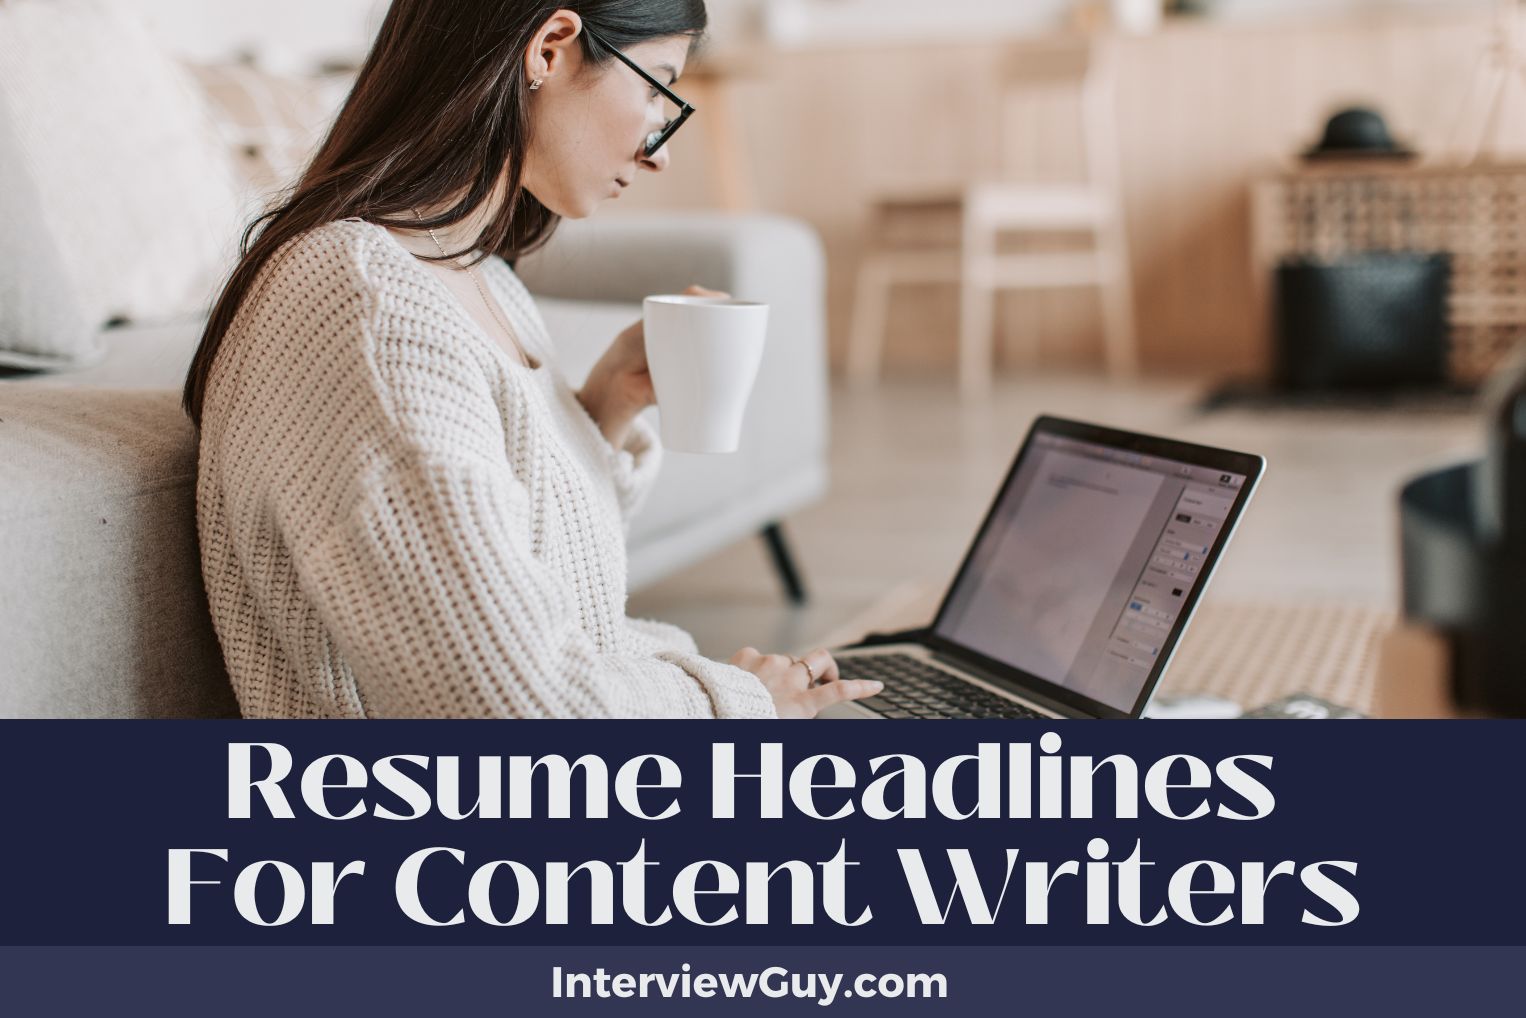 Resume Headlines For Content Writers